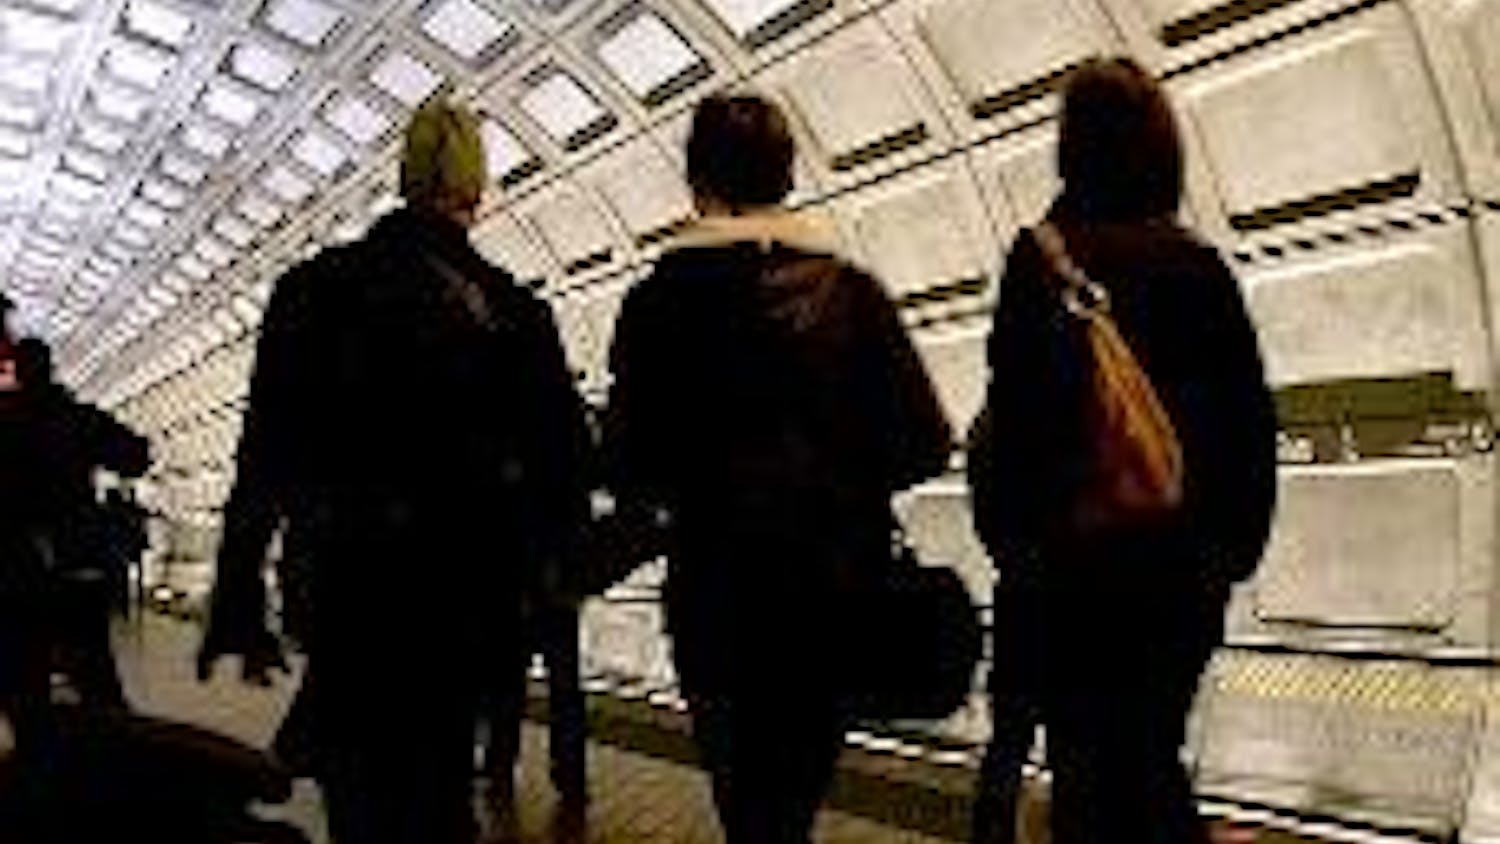 METRO PATROLS - The Metro Transit Police Department is planning to increase its patrolling of Metrorail stations throughout the D.C.-area system as a way of combating a recent rise in robberies on Metro property. Between 2006 and 2007, robberies throughou